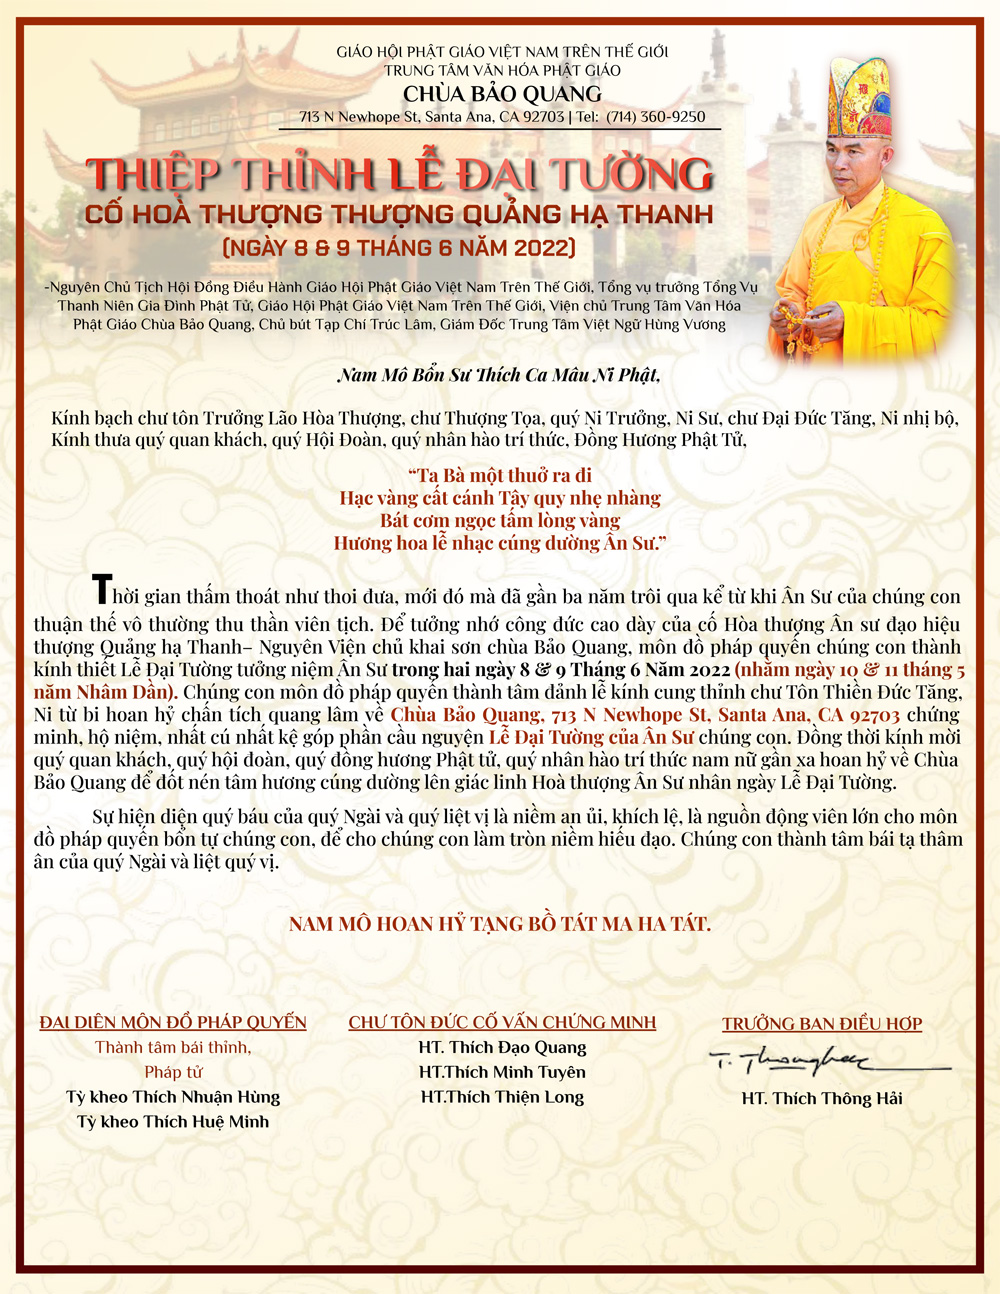 le dai tuong-ht thich quang thanh